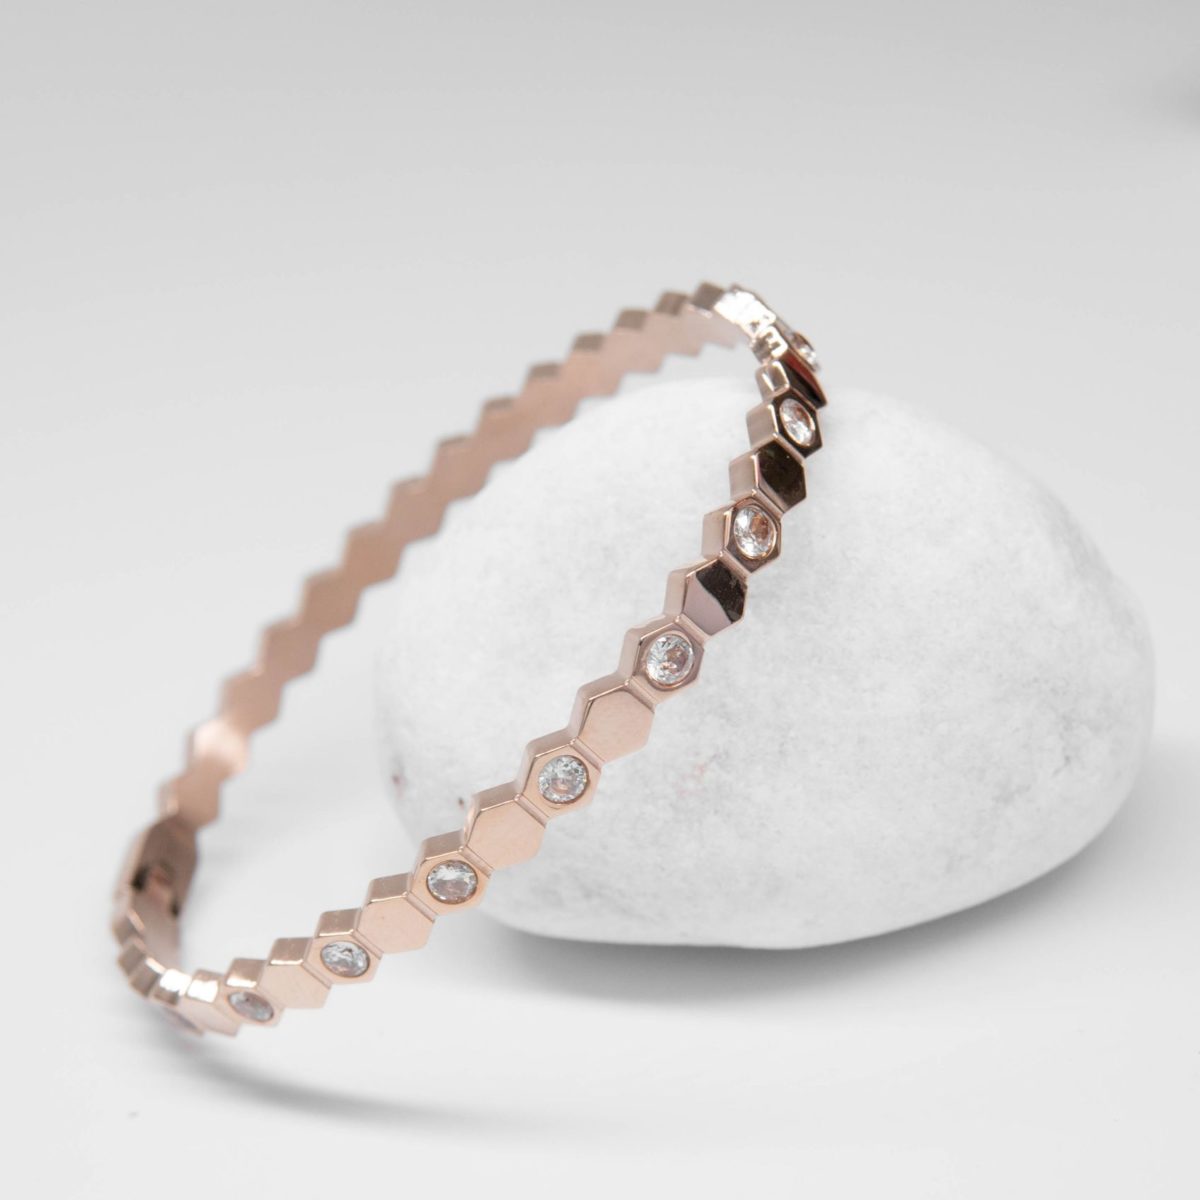 https://m.clubbella.co/product/larry-18-k-rose-gold-plated-bangle/ Larry (4)